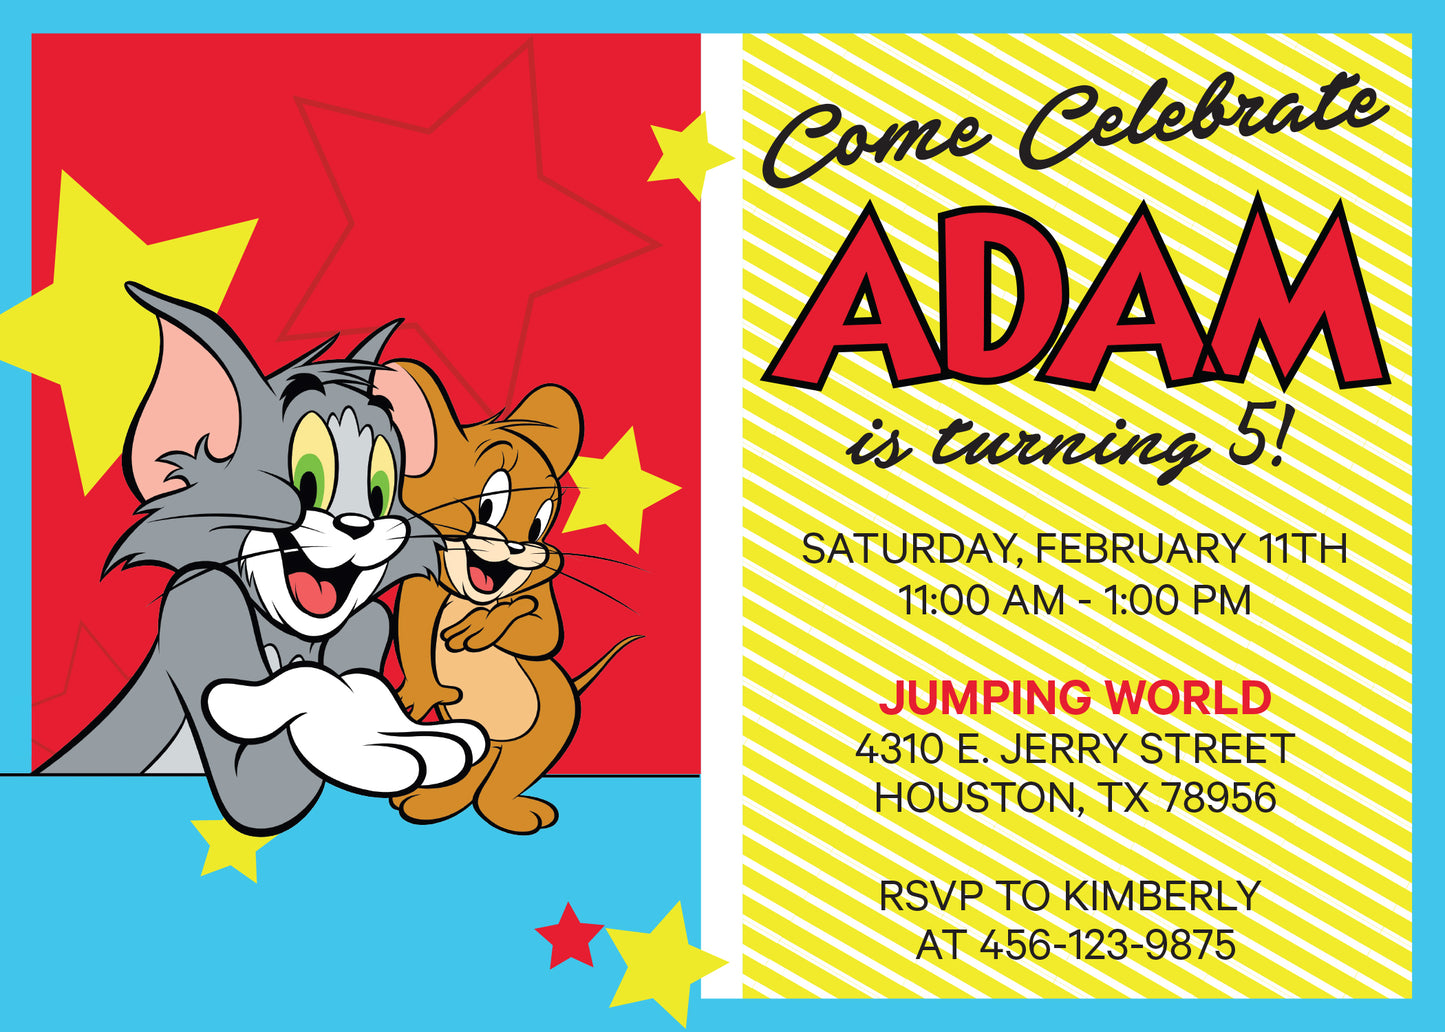 TOM & JERRY Birthday Party Invitation with 2 Options - You Choose! Printed or Digital!